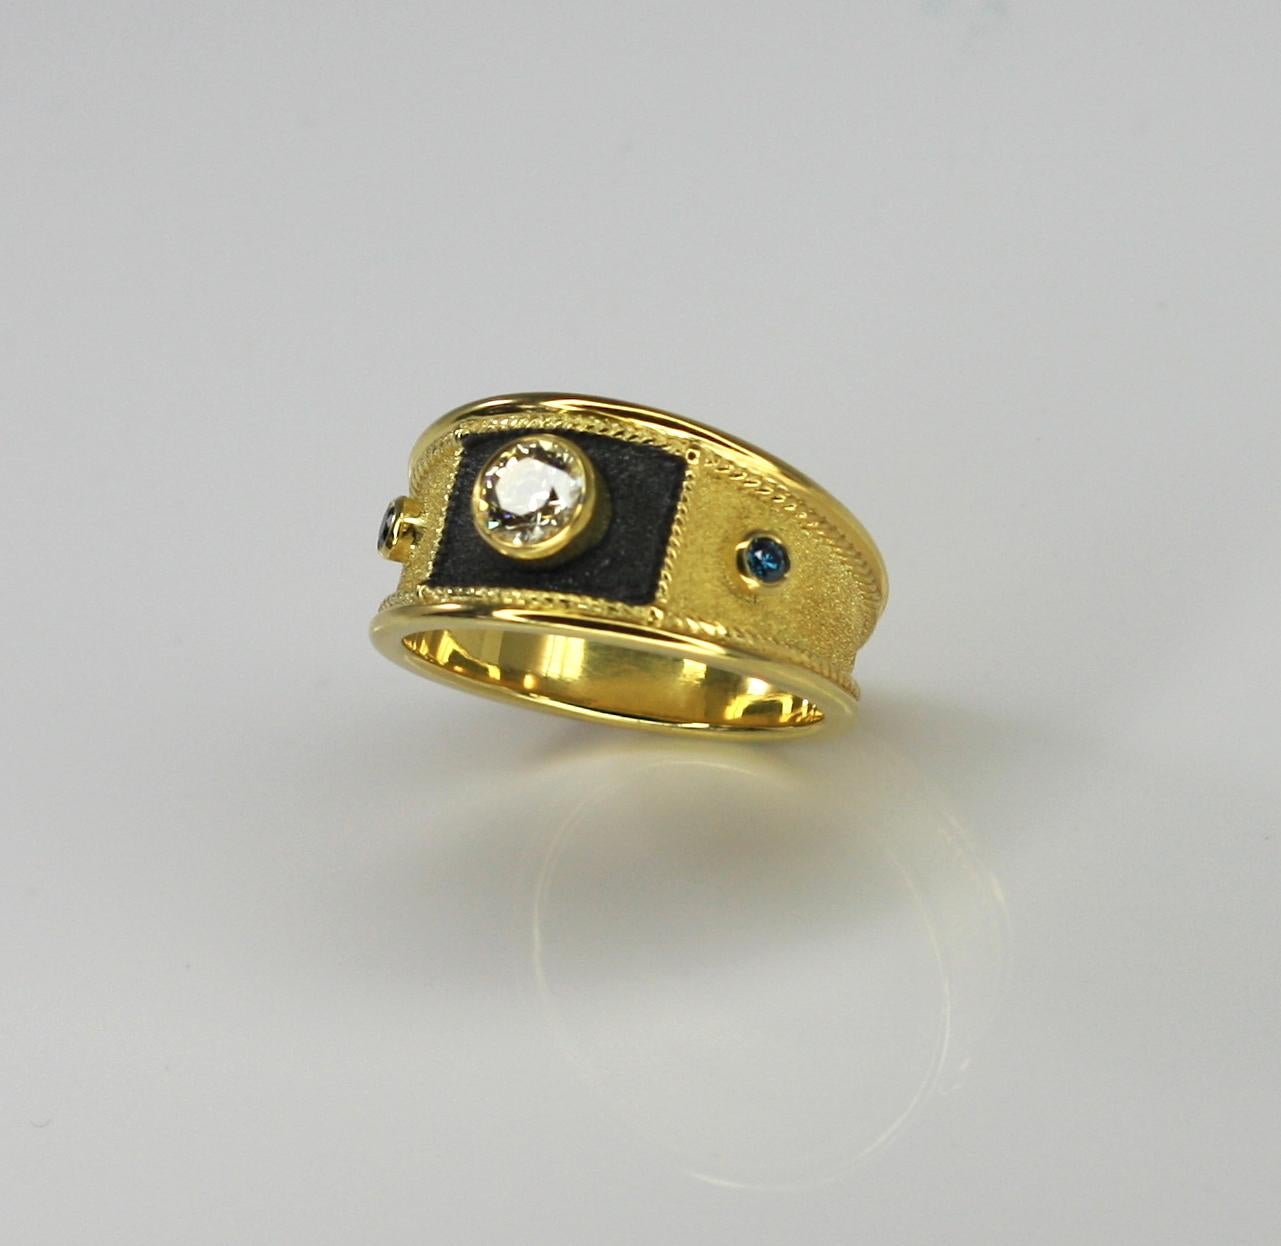 S.Georgios design ring handmade from solid 18 Carat Yellow Gold and decorated with granulation and Byzantine velvet background. The square front area surrounding the diamond is finished in Black Rhodium. This gorgeous unisex ring features 0.44 Carat